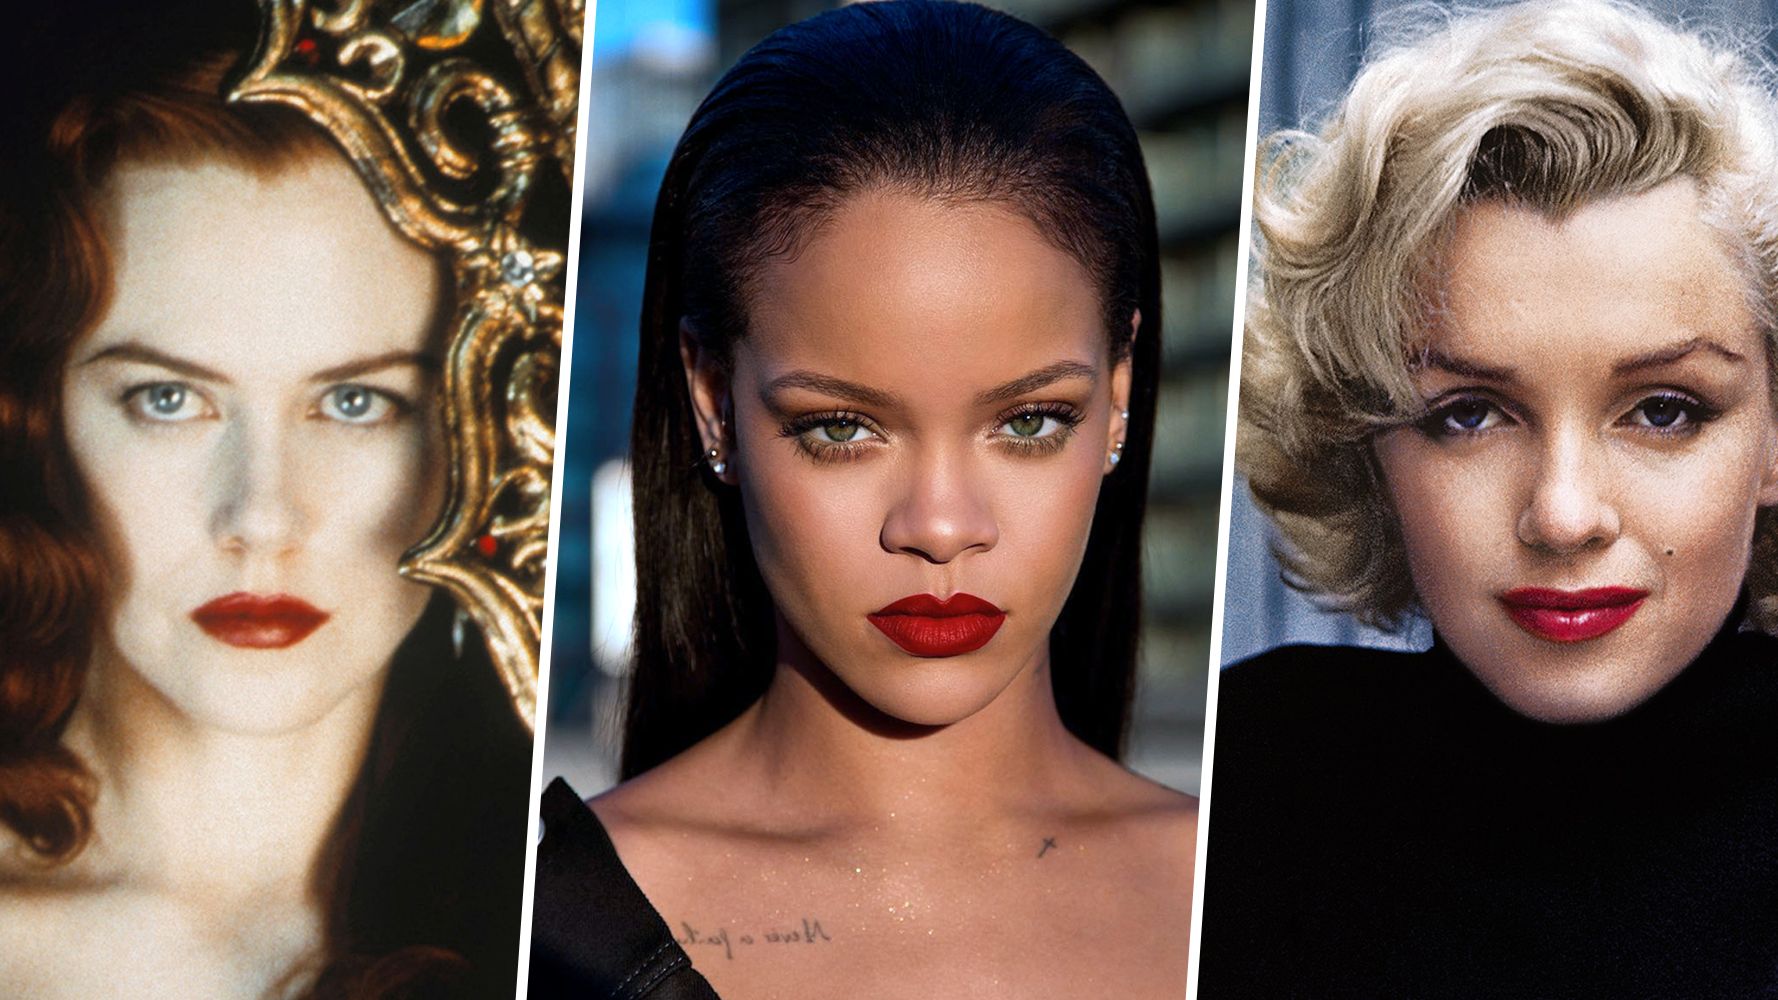 The 15 Best Red Lipsticks That Are Nothing Short of Iconic